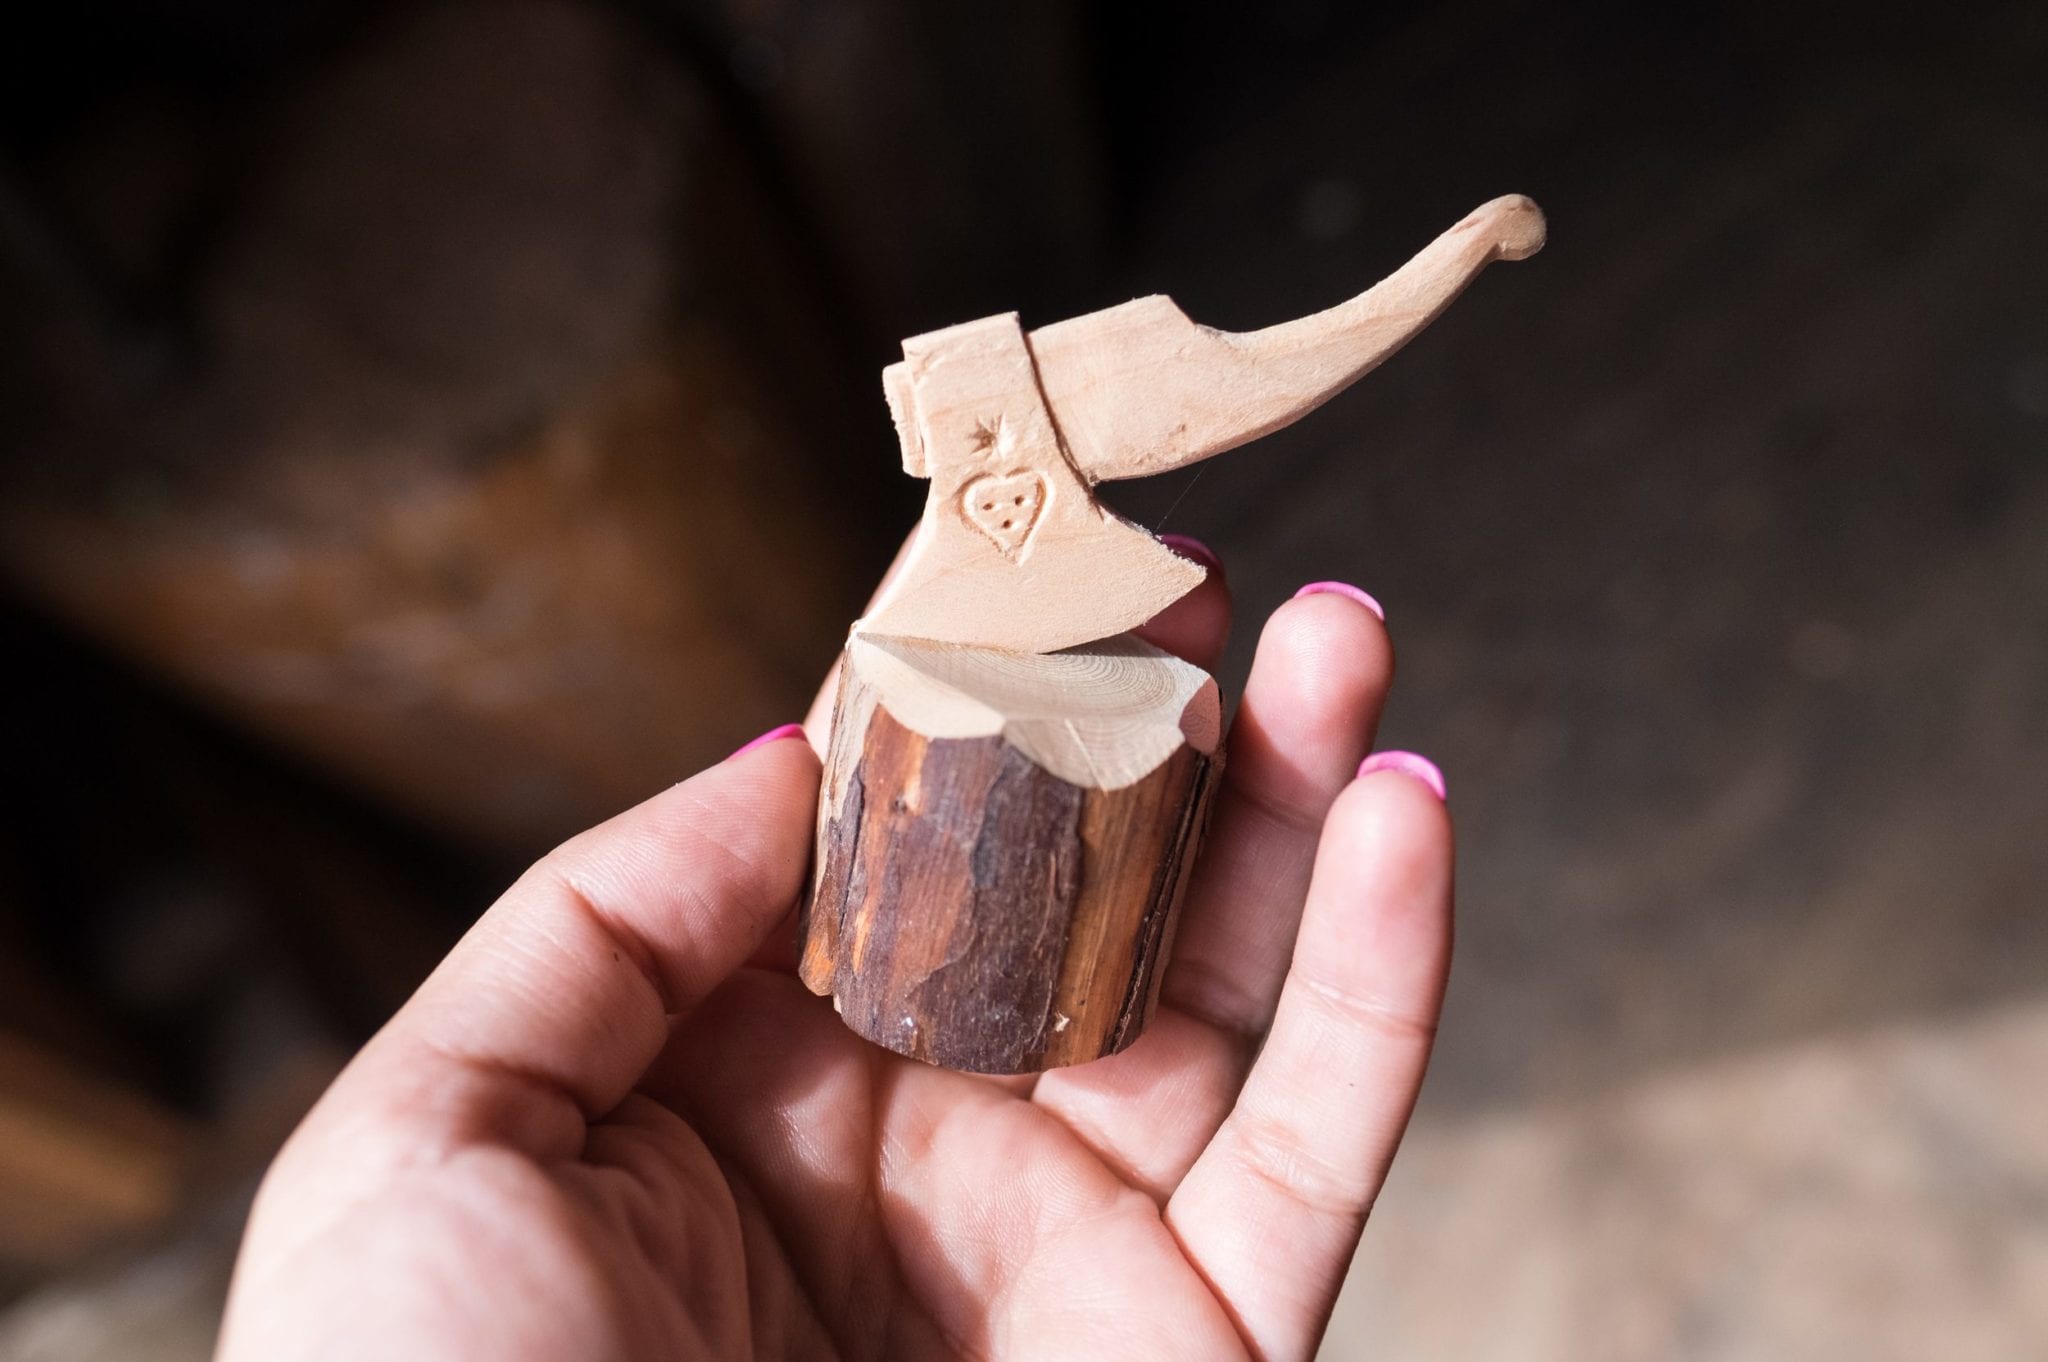 A small wooden carving of an axe in a stump, held in a hand.